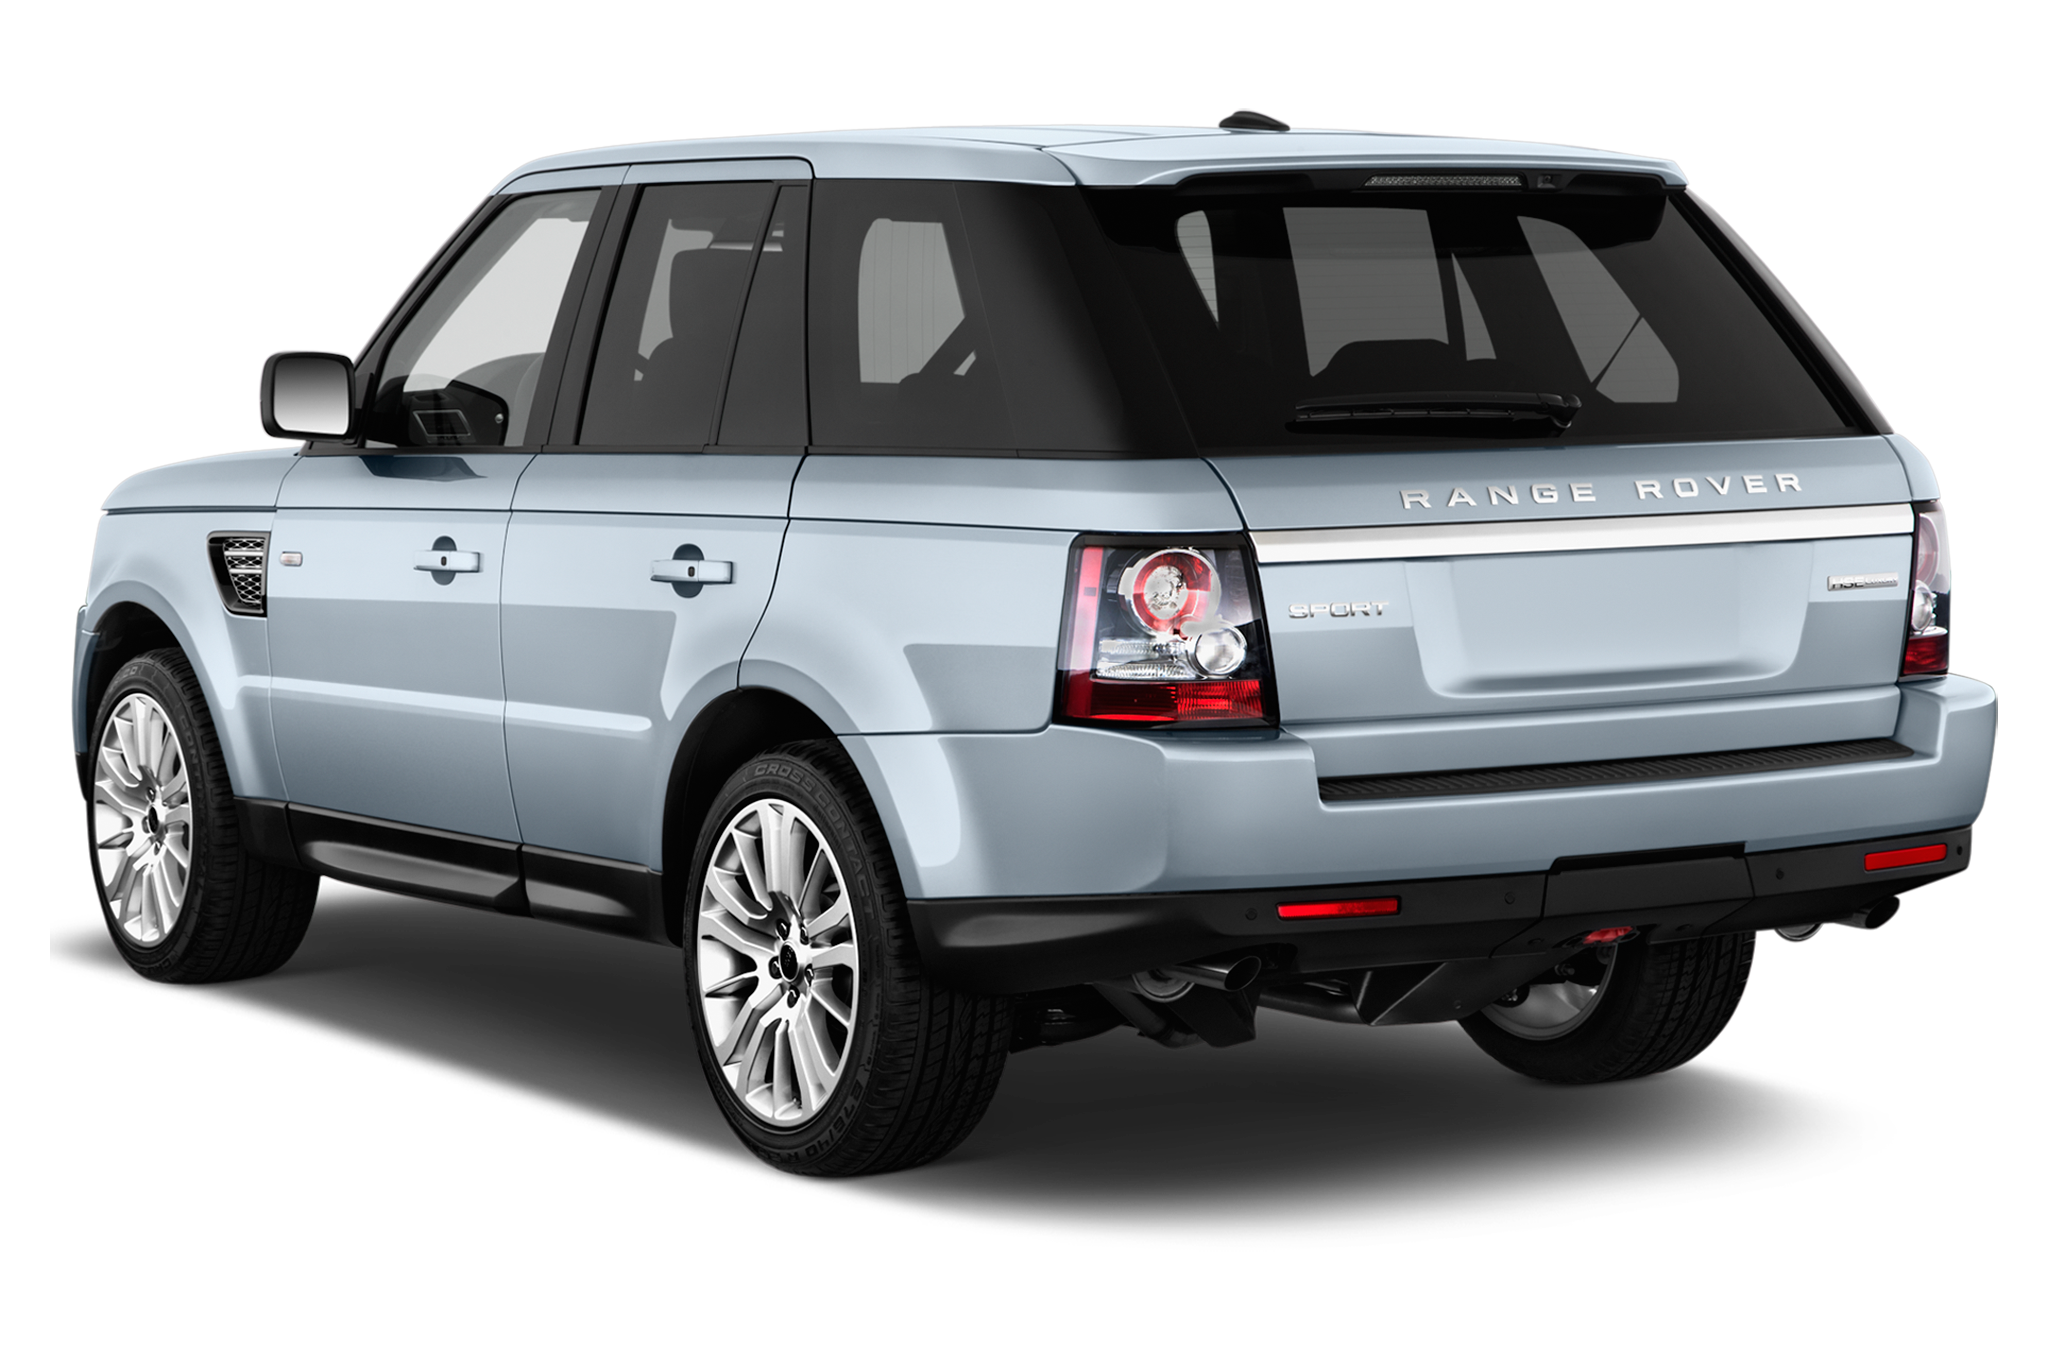 Land Rover Range Rover PNG Photo Image